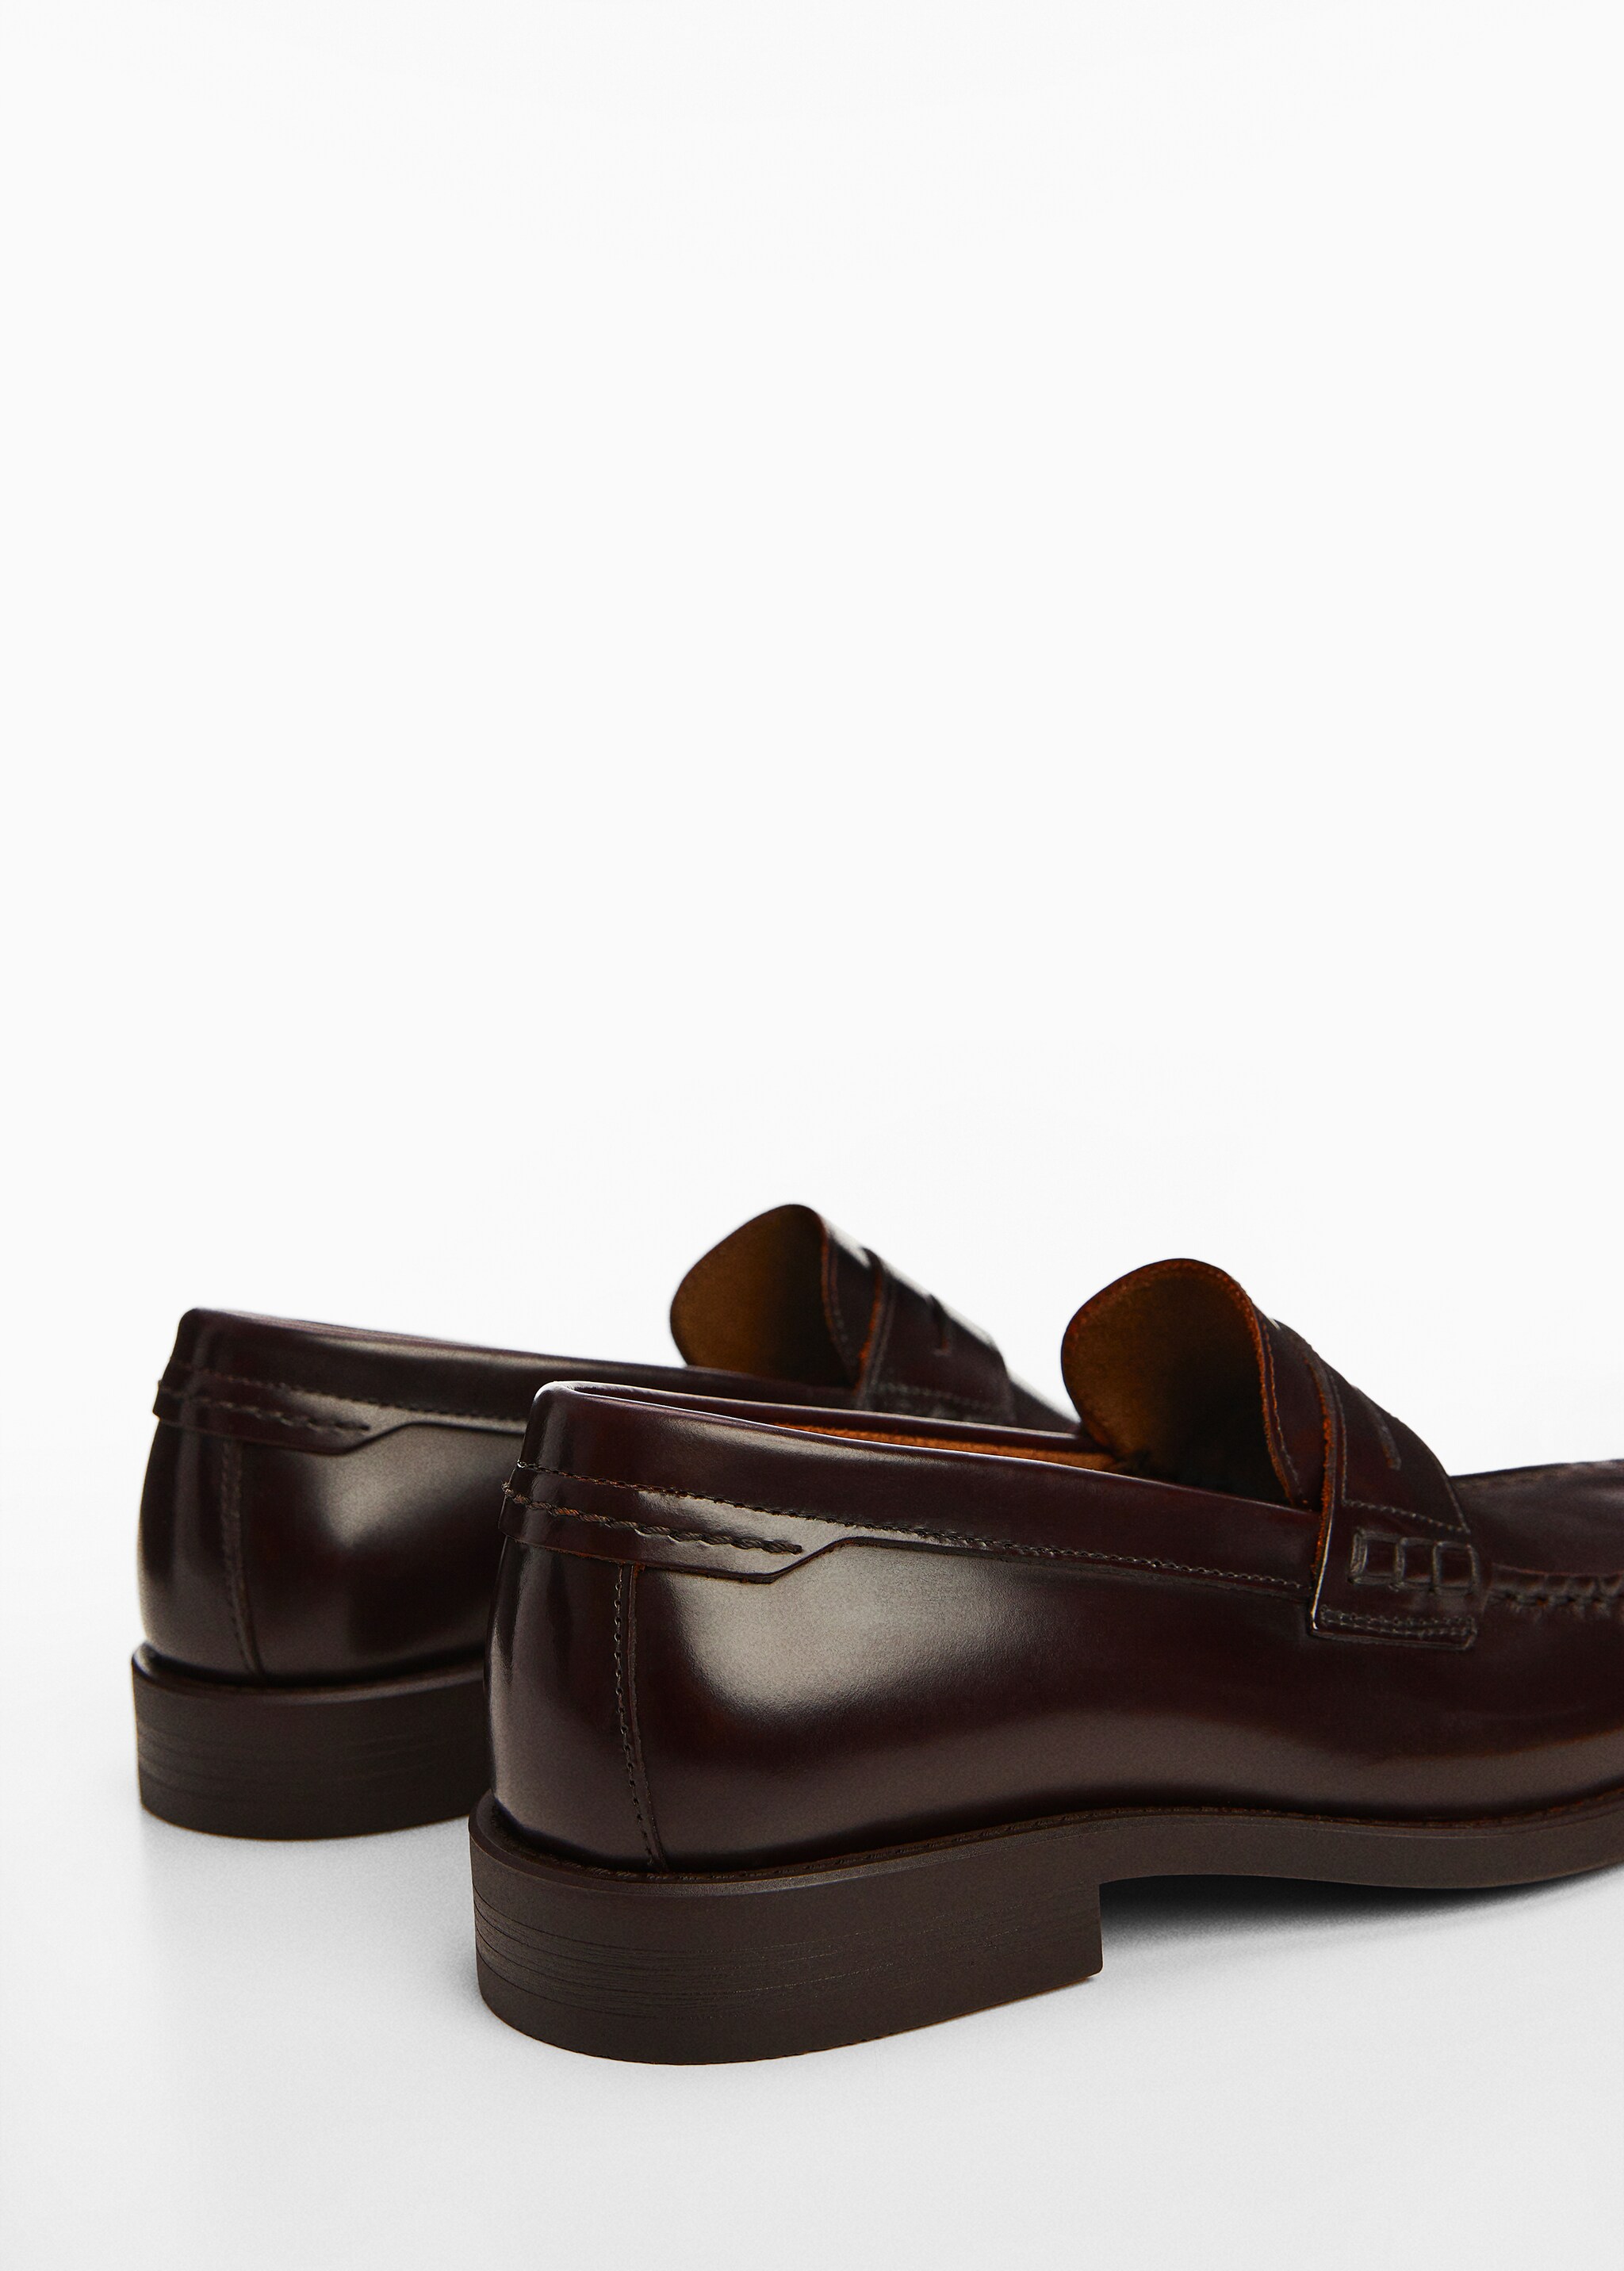 Leather penny loafers - Details of the article 1